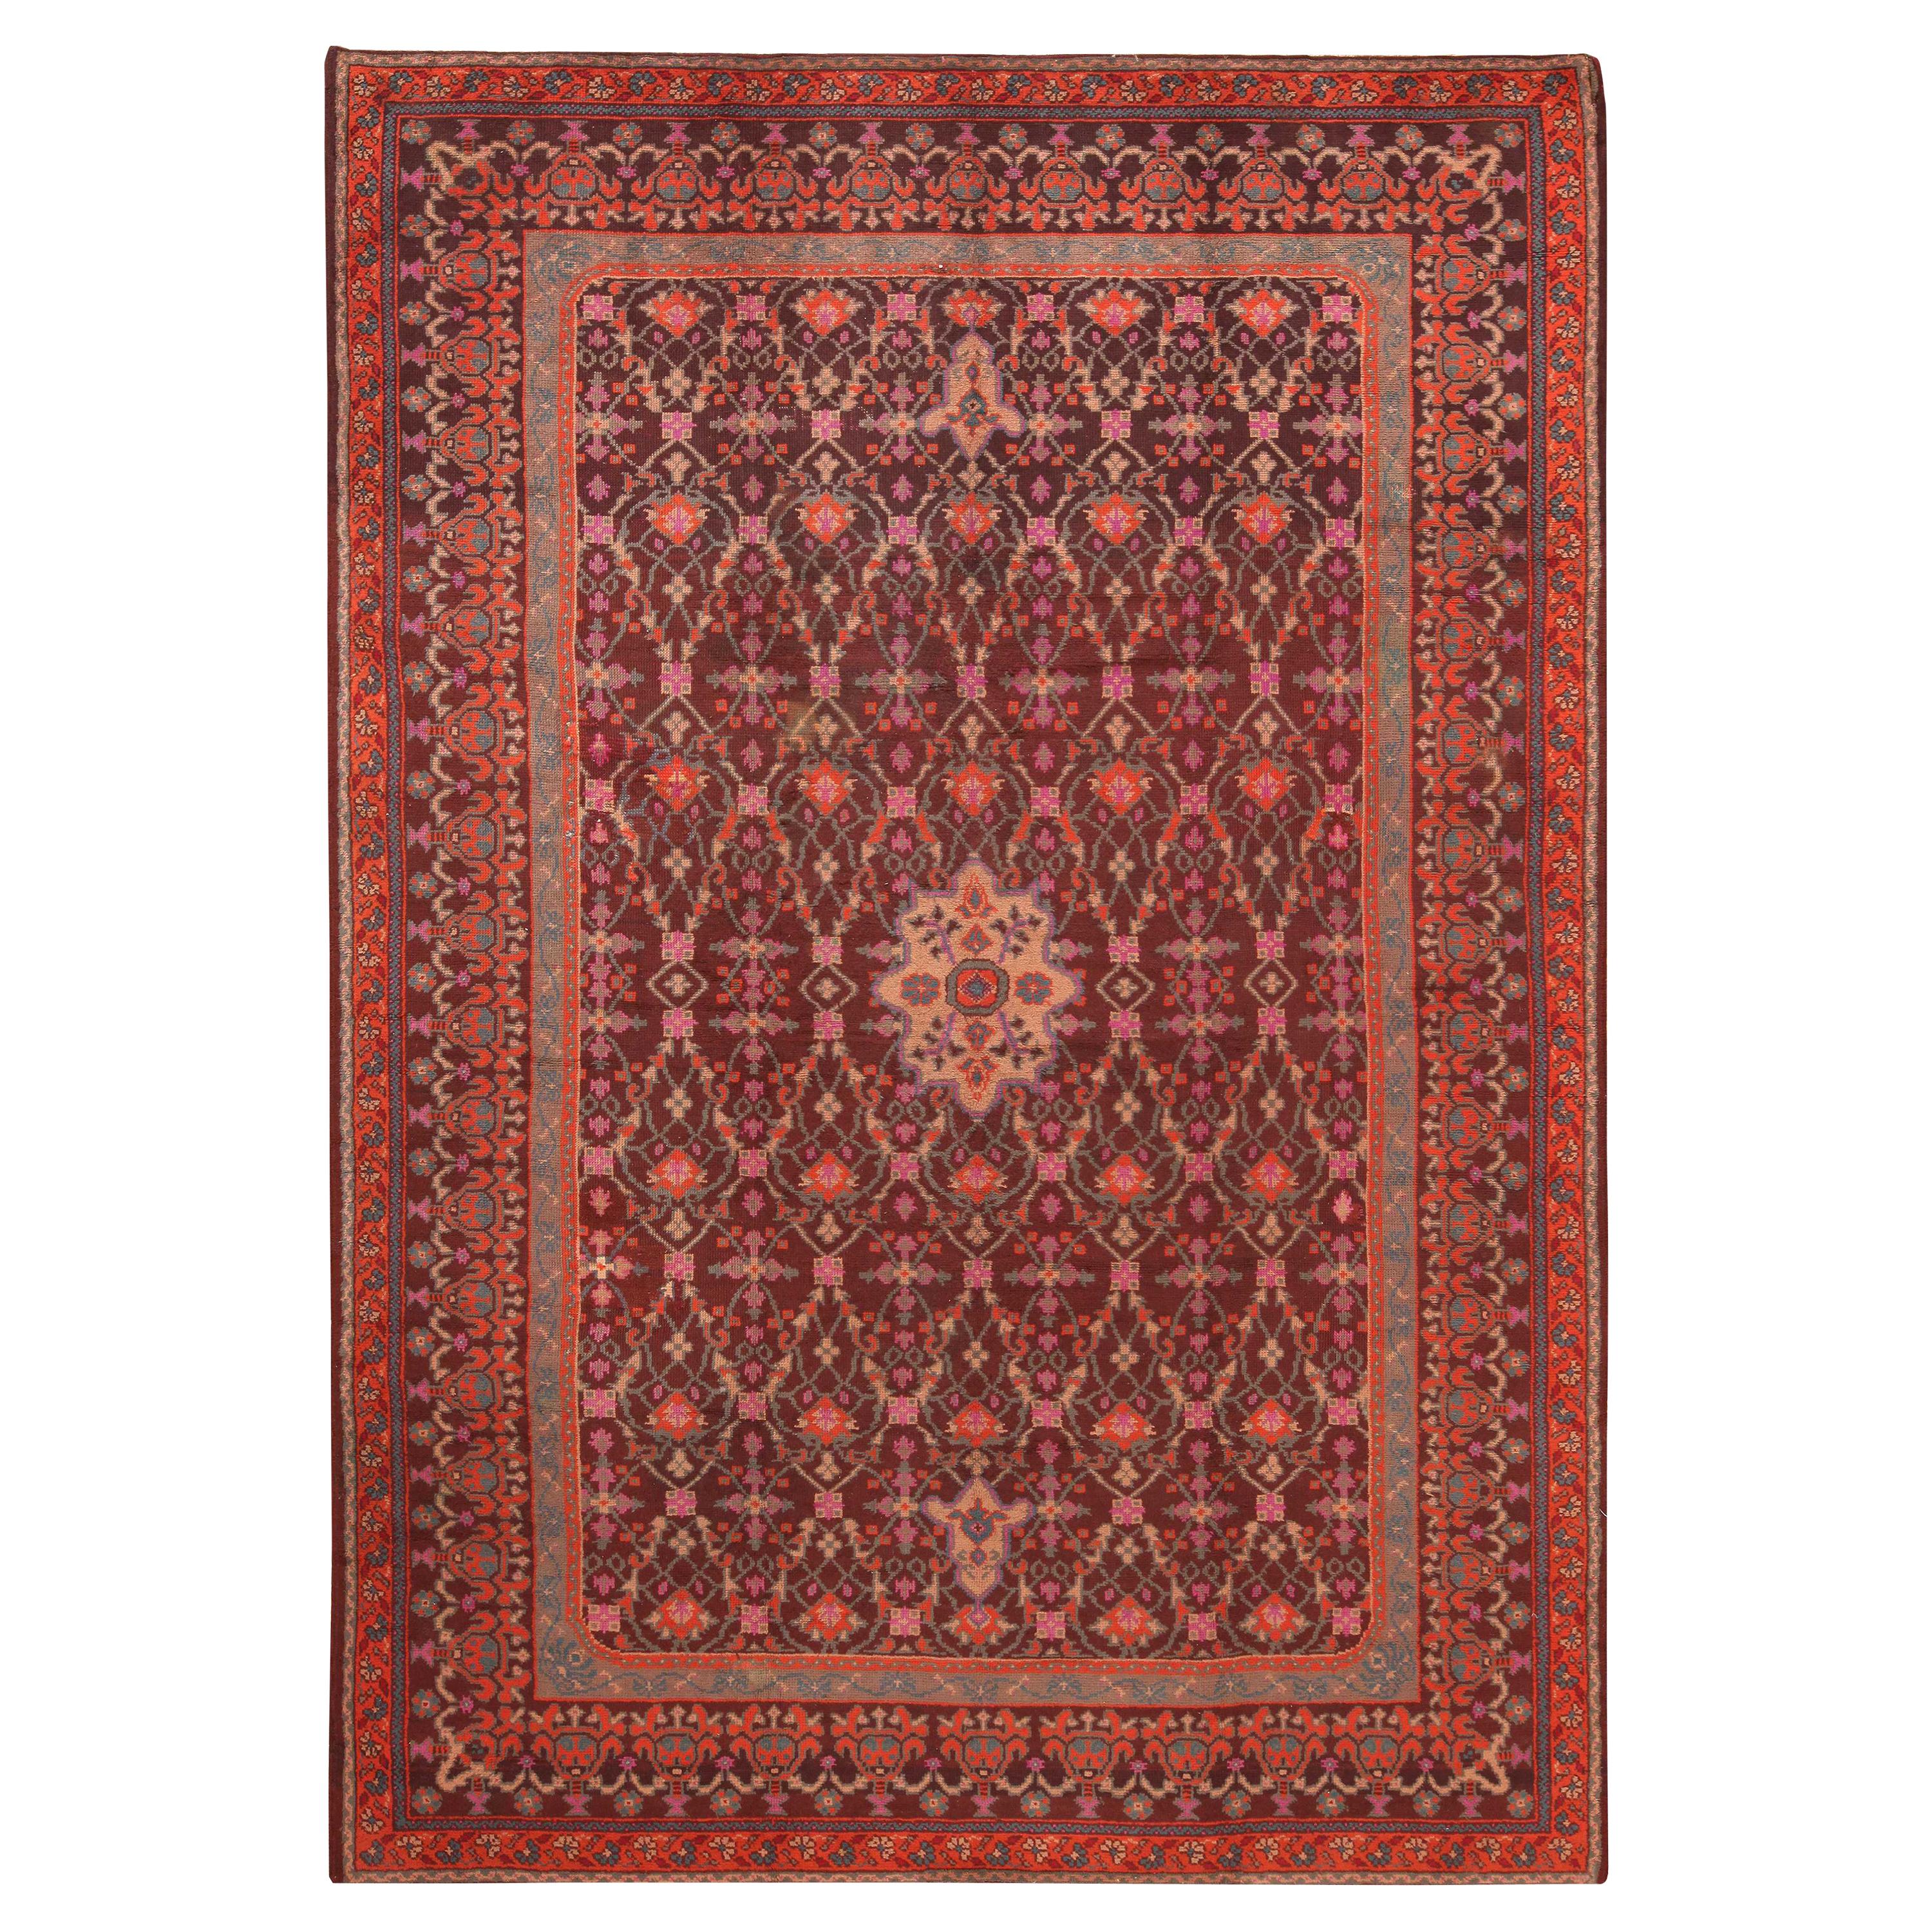 Nazmiyal Collection Vintage German Continental Rug. Size: 8 ft 2 in x 11 ft 8 in